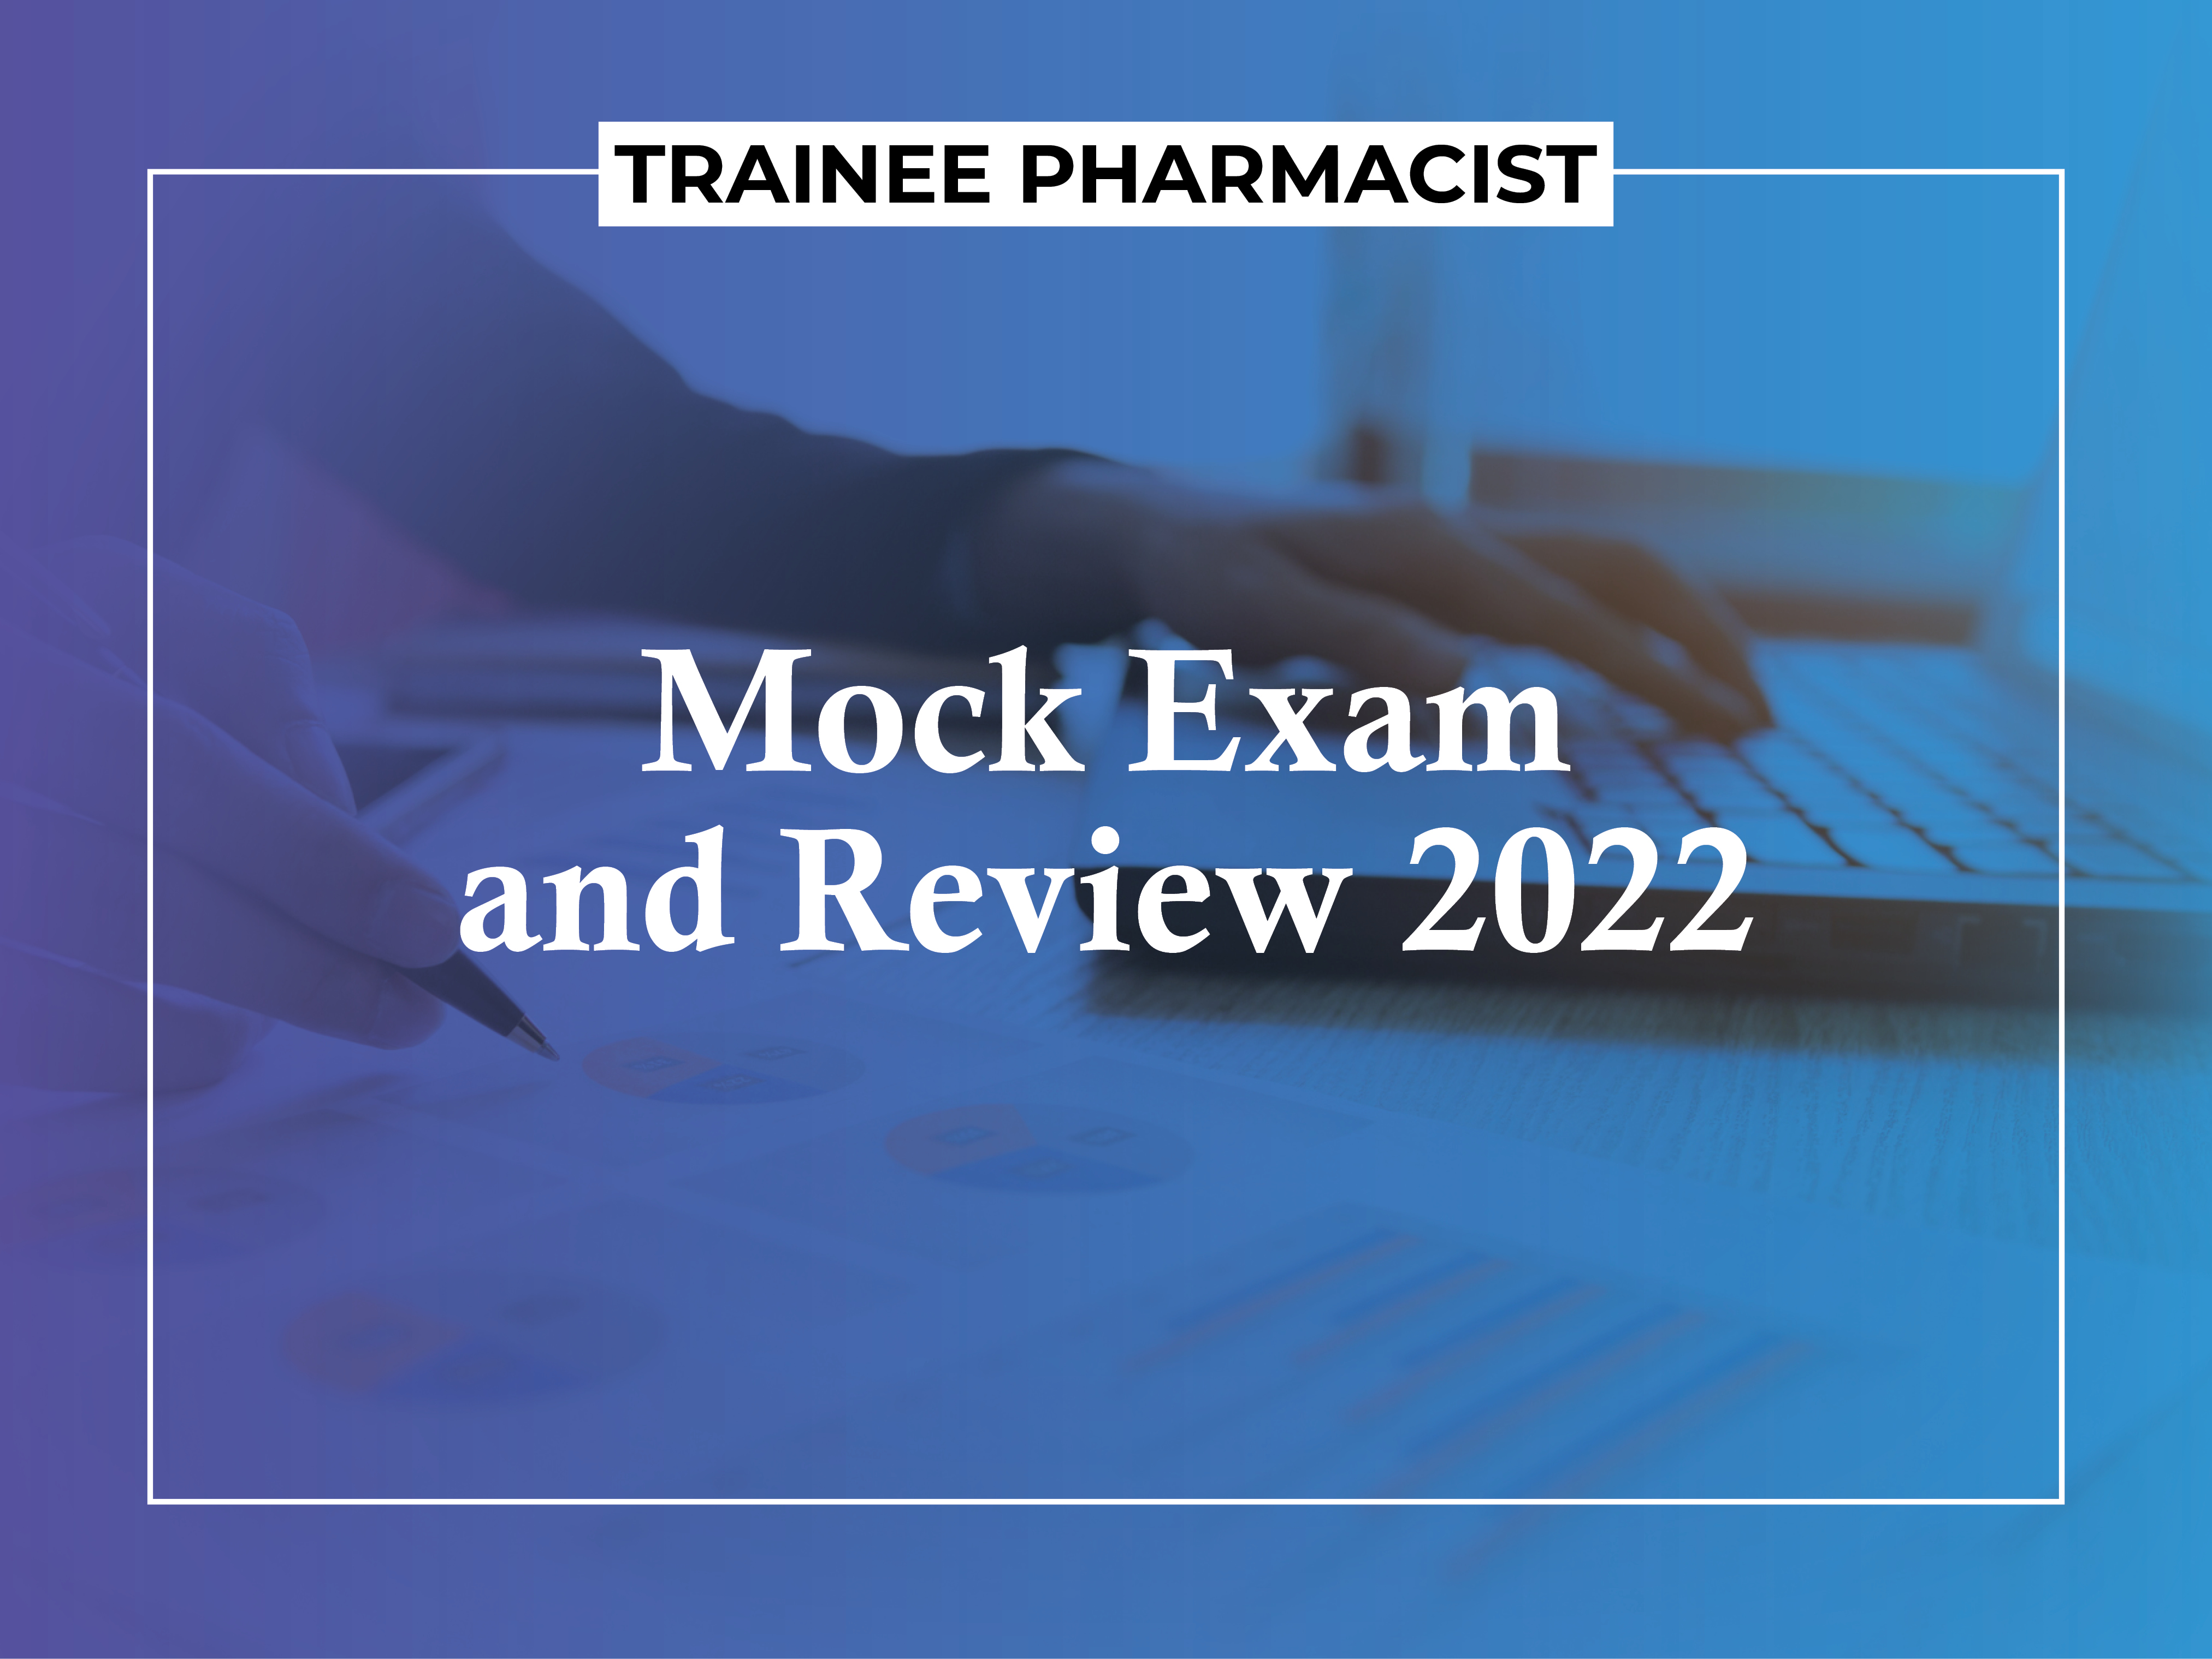 Mock Exam and Review 2022